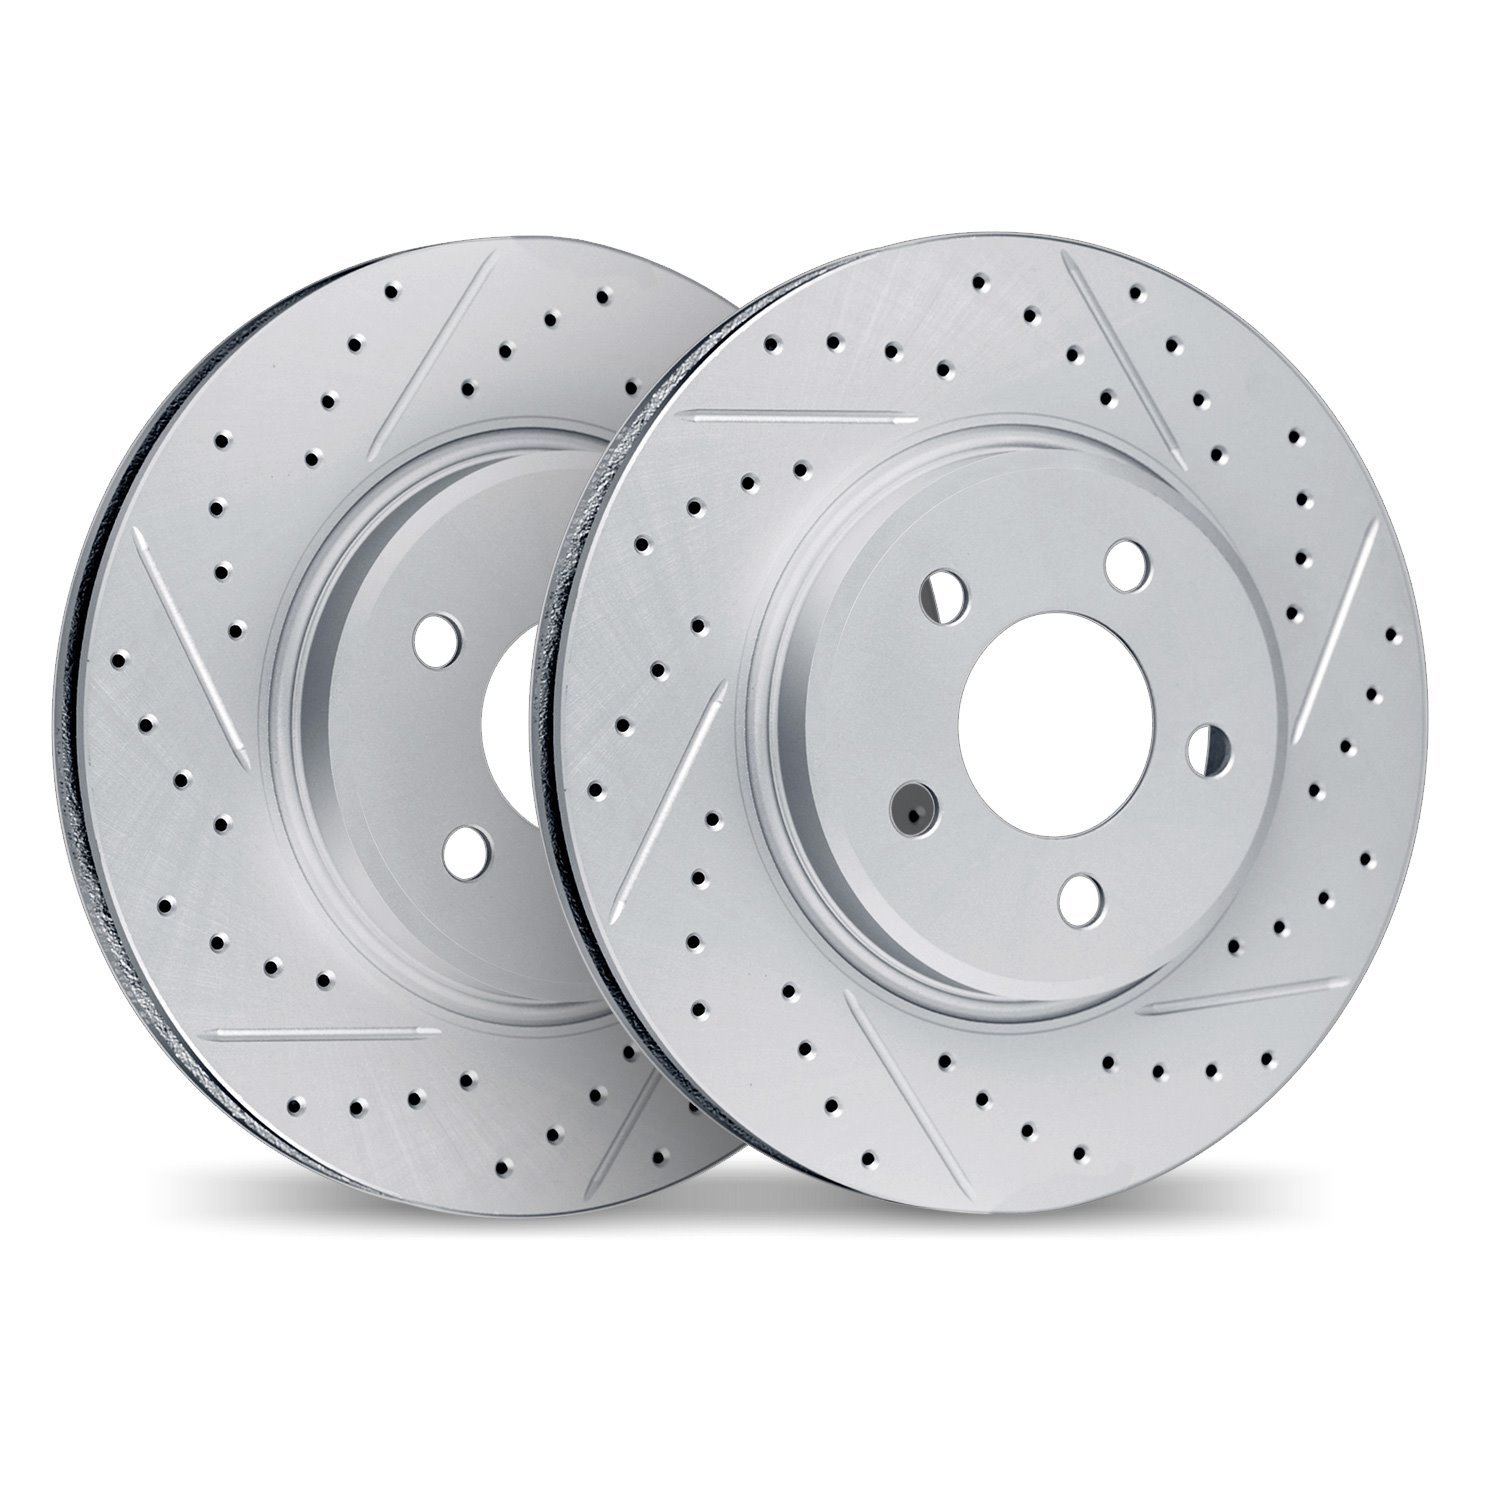 2002-63071 Geoperformance Drilled/Slotted Brake Rotors, Fits Select Mercedes-Benz, Position: Rear